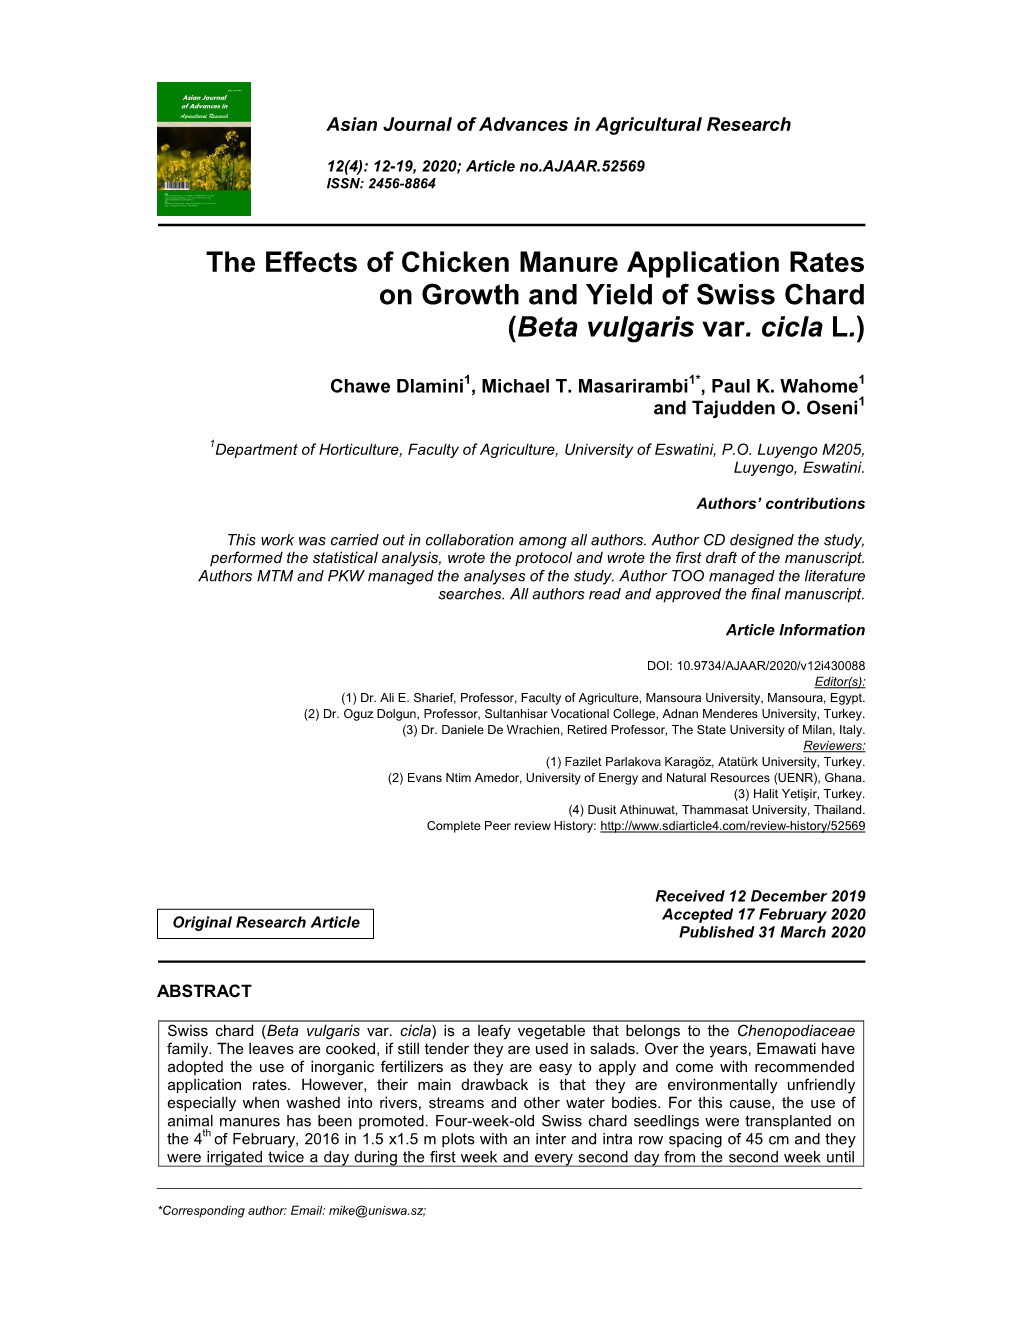 The Effects of Chicken Manure Application Rates on Growth and Yield of Swiss Chard (Beta Vulgaris Var